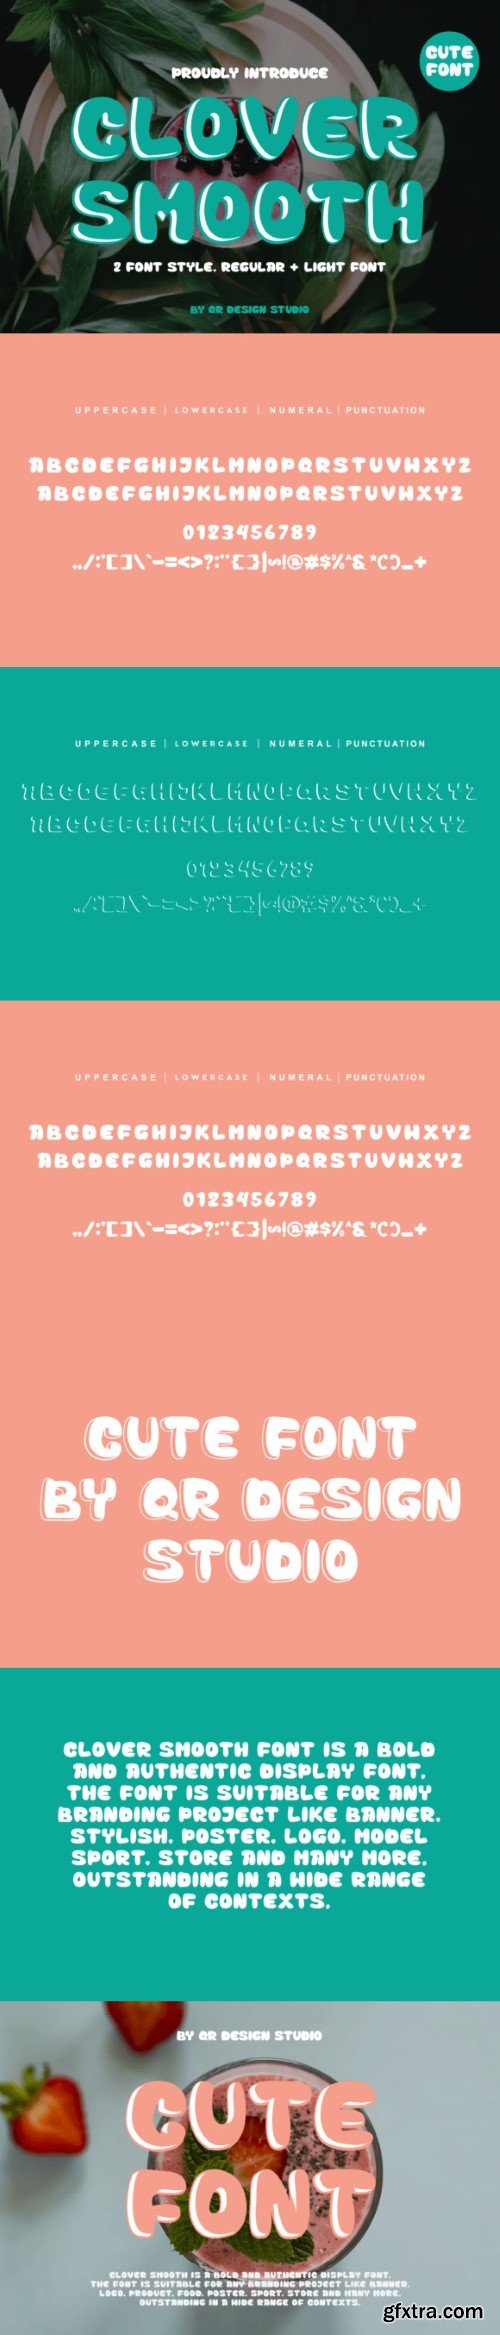 Clover Smooth Font